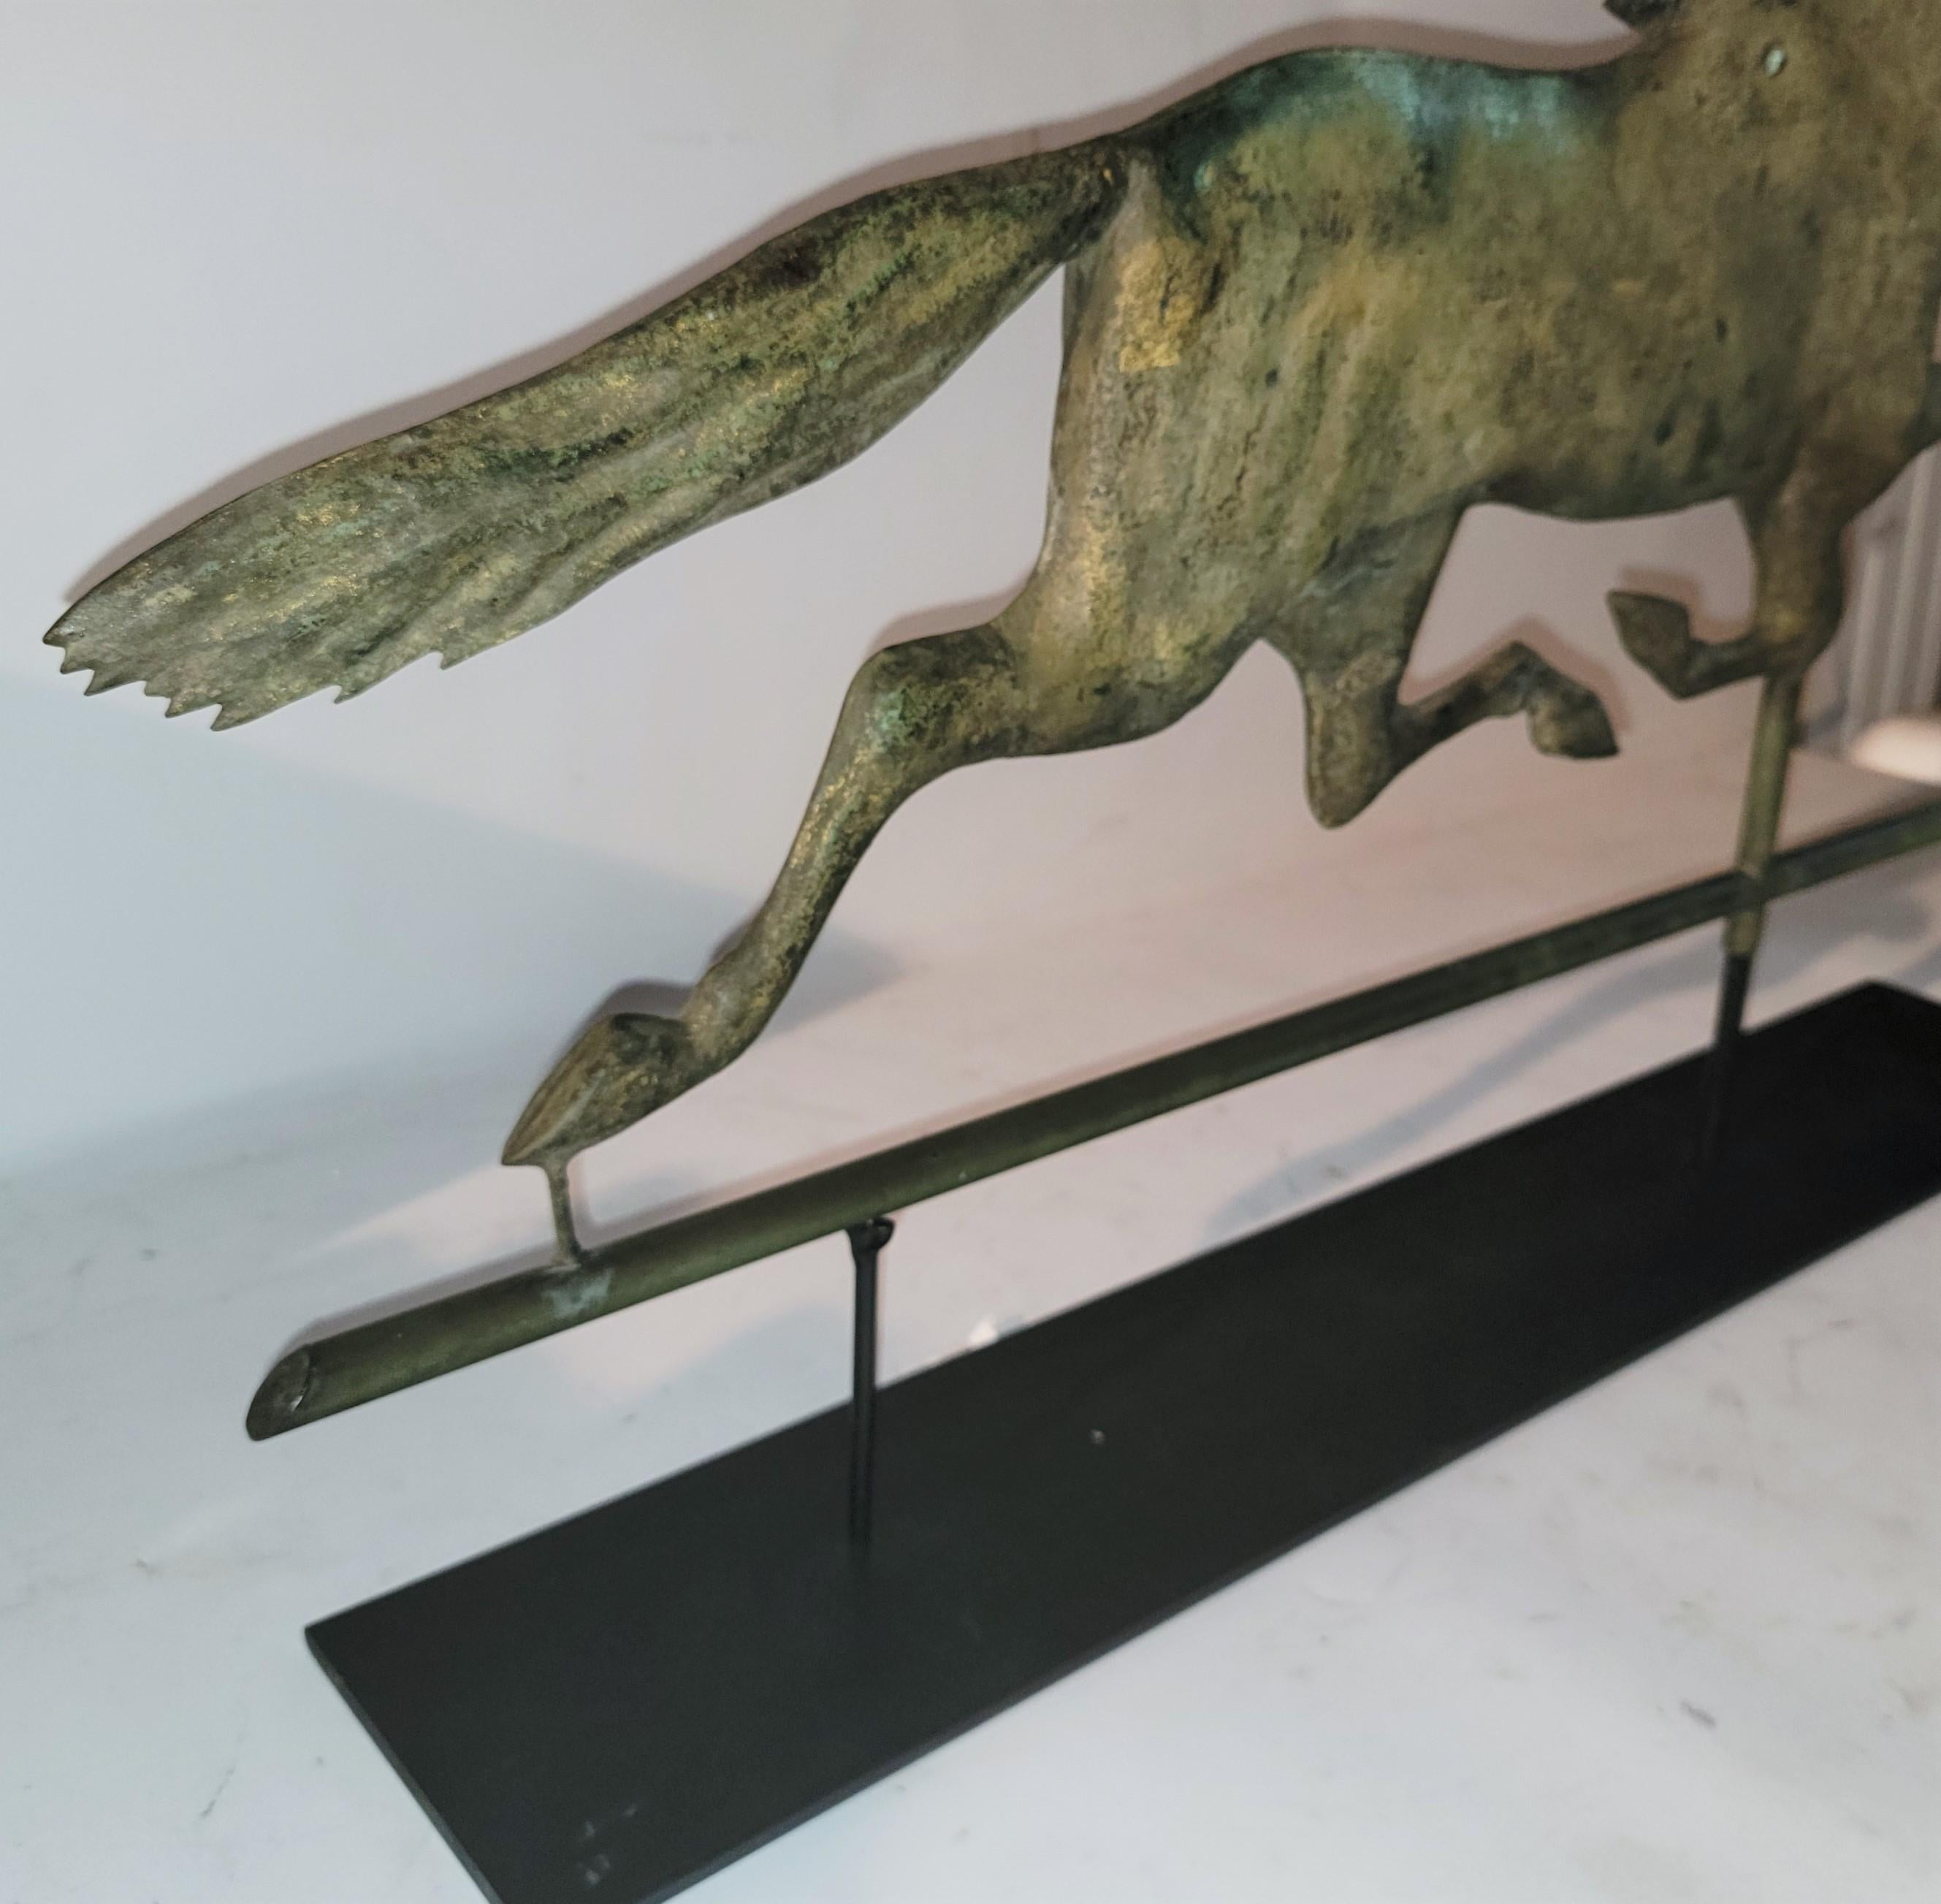 19thc Full body copper horse weather vane with original gilded surface. The condition is good with bullet marks but not holes. This vane comes to us from a private collection in New England. It also has the original custom made cast iron base.